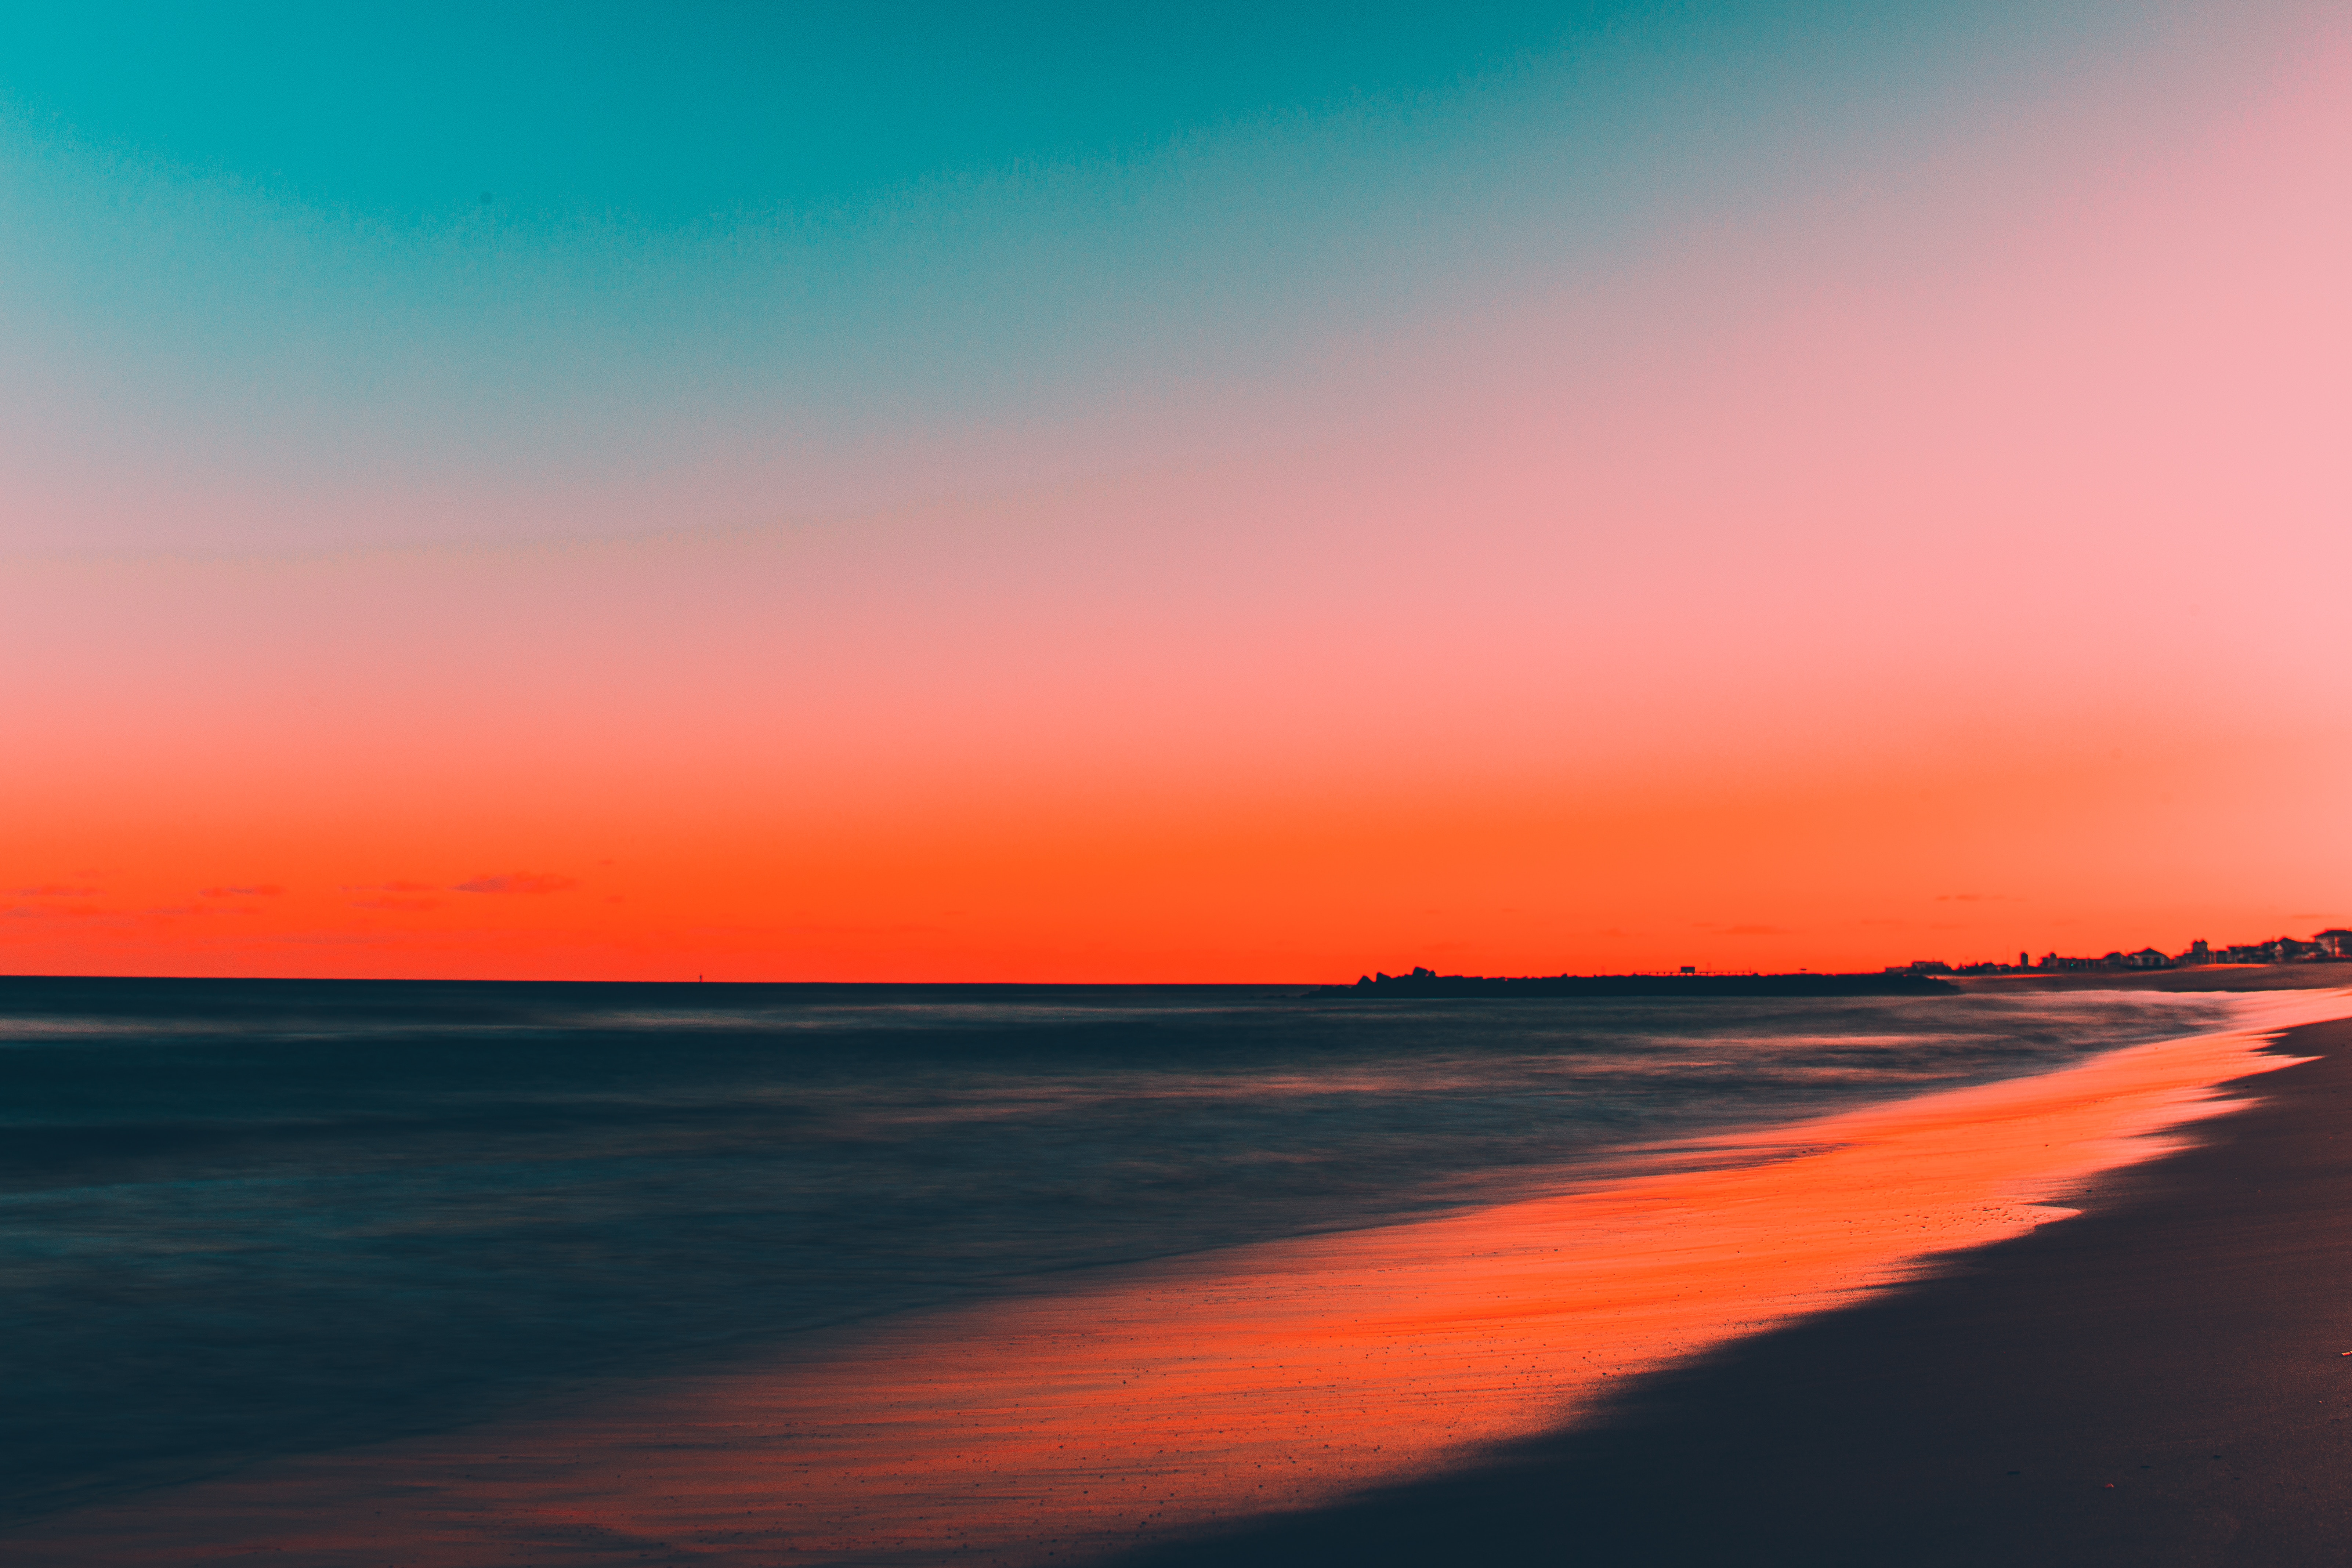 Download wallpaper 6406x4271 sea, shore, sunset, sky hd background